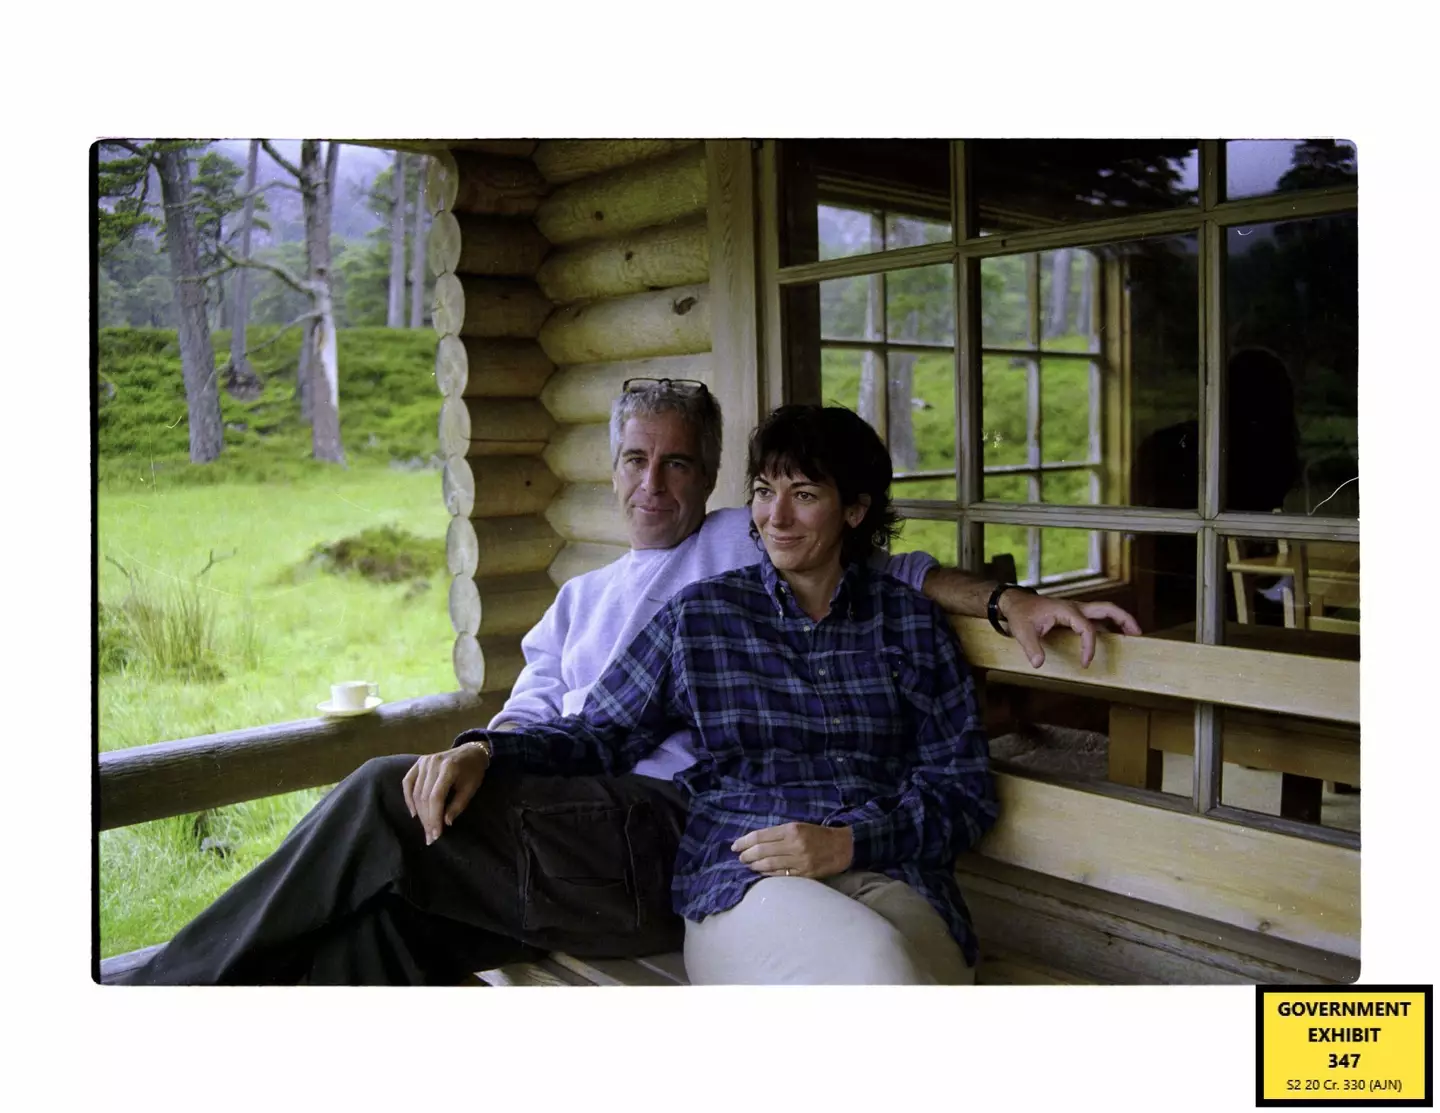 Jefferey Epstein and Ghislaine Maxwell at the Queen's lodge at Balmoral in 1999.